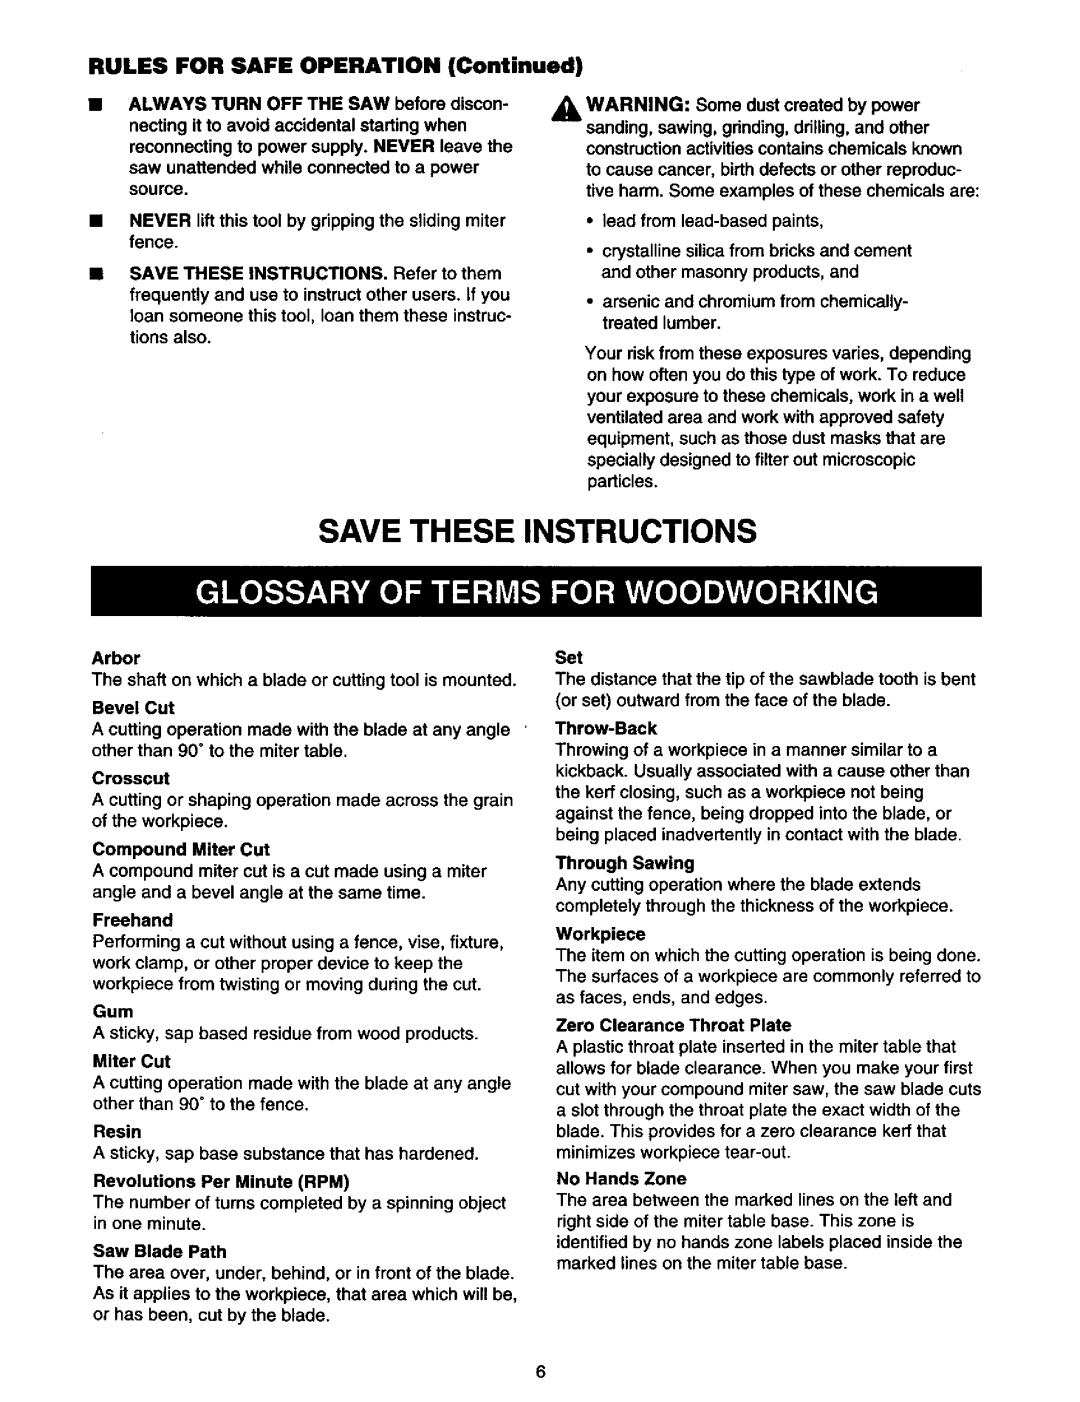 Craftsman 315.21213 manual Save These Instructions, Rules For Safe Operation, Continued 